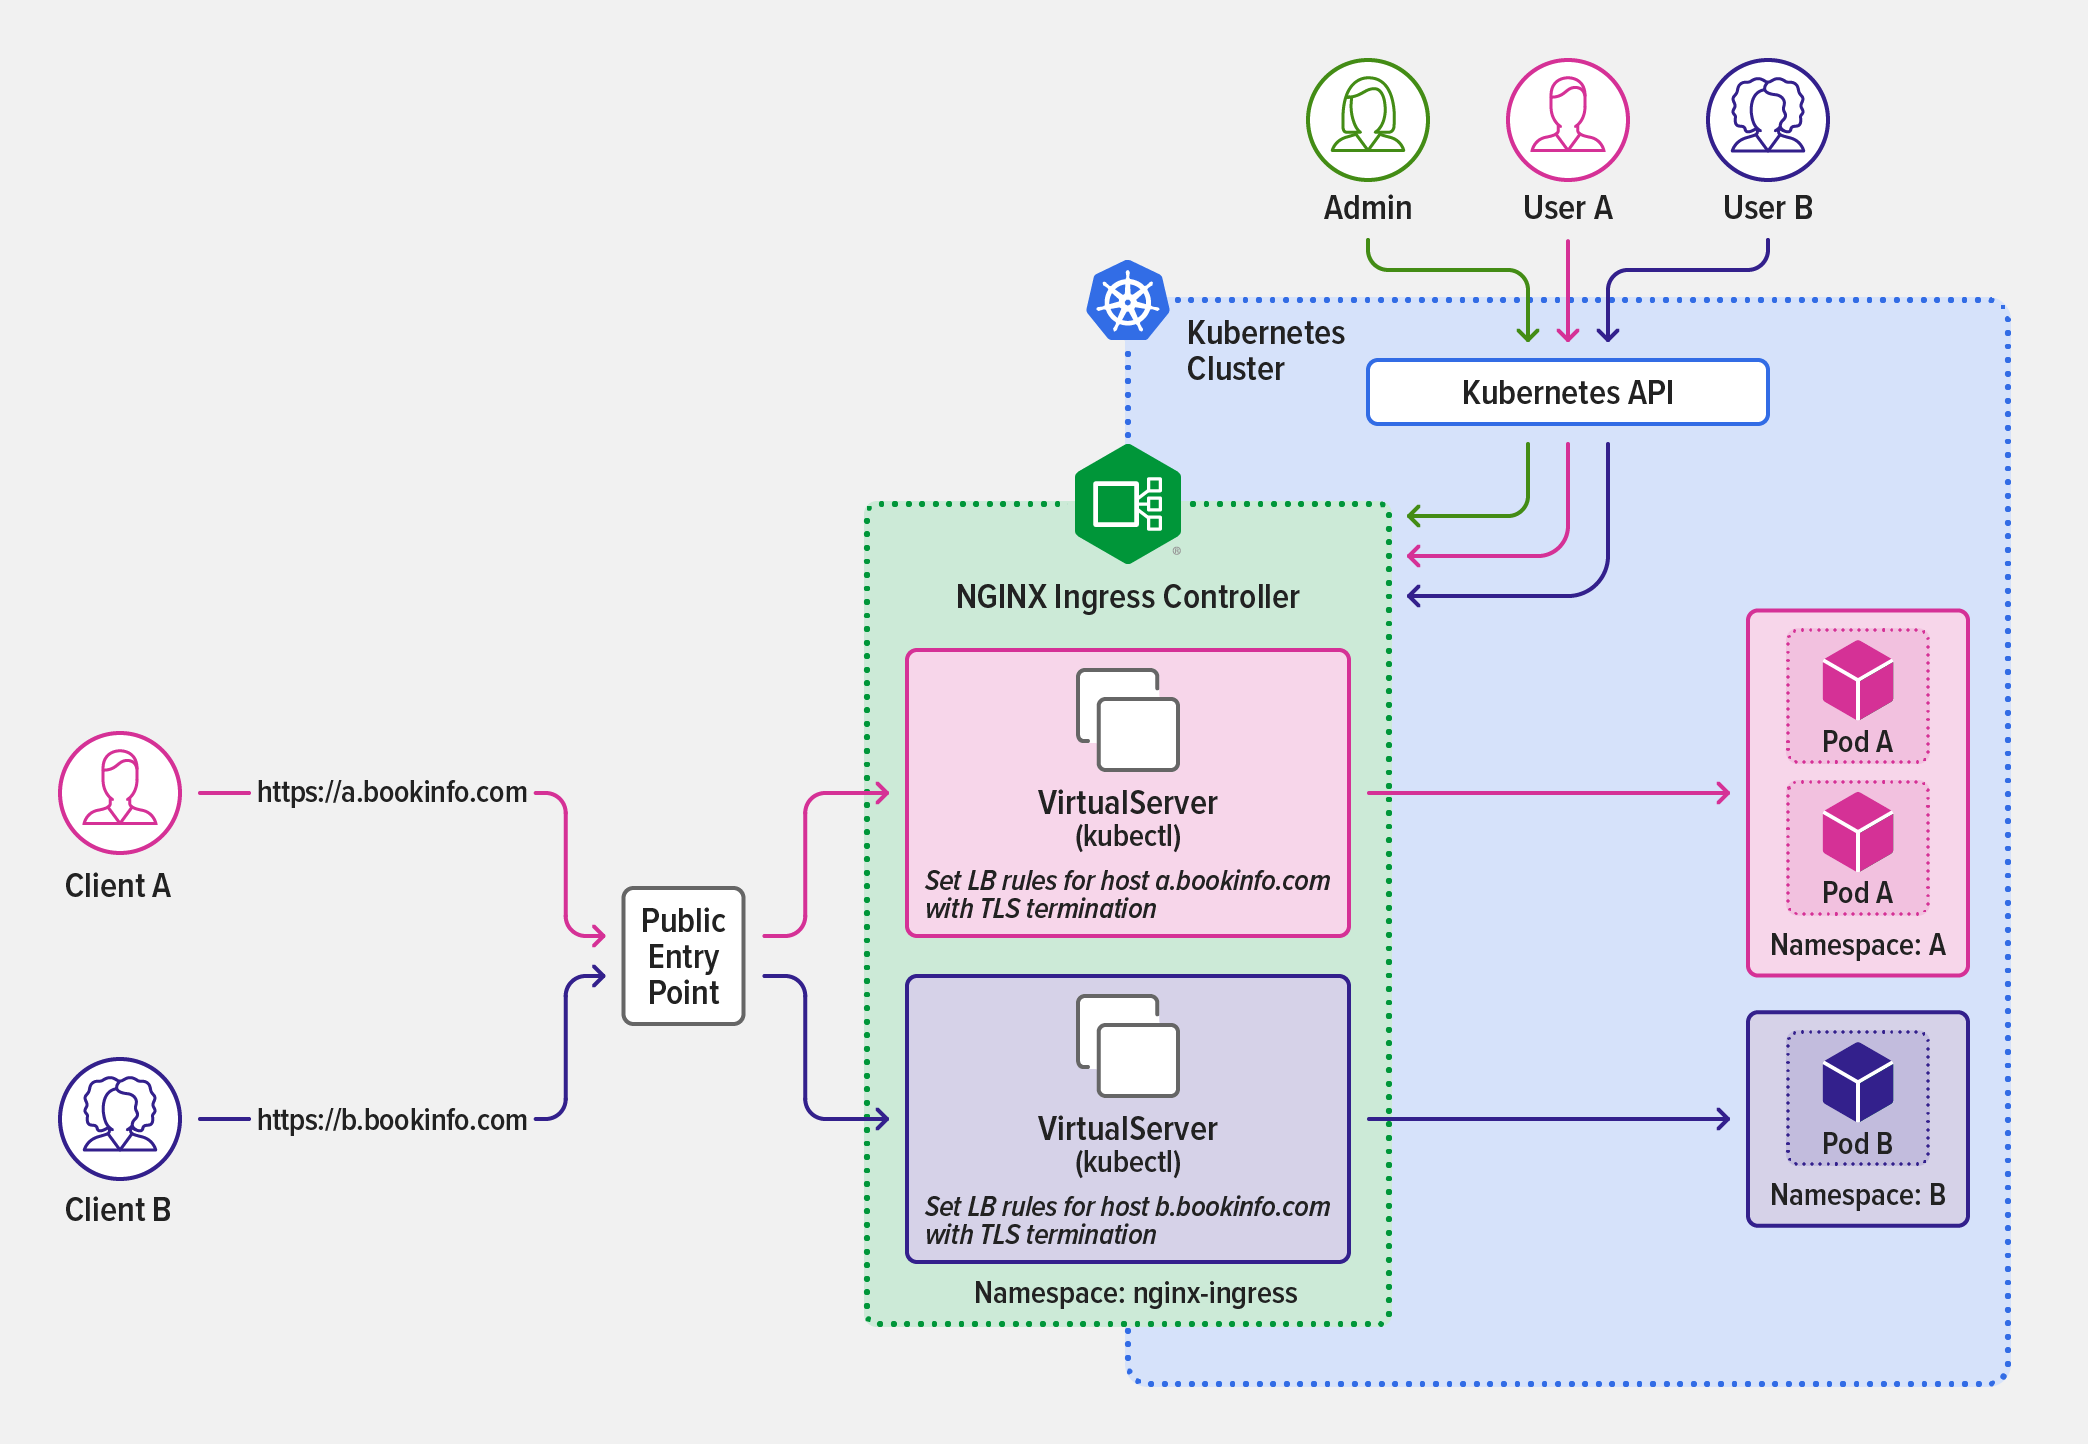 Topology of full self-service in a Kubernetes cluster, where administrators only deploy and expose NGINX Ingress Controller; developers then deploy applications within an assigned namespace without involving the administrator